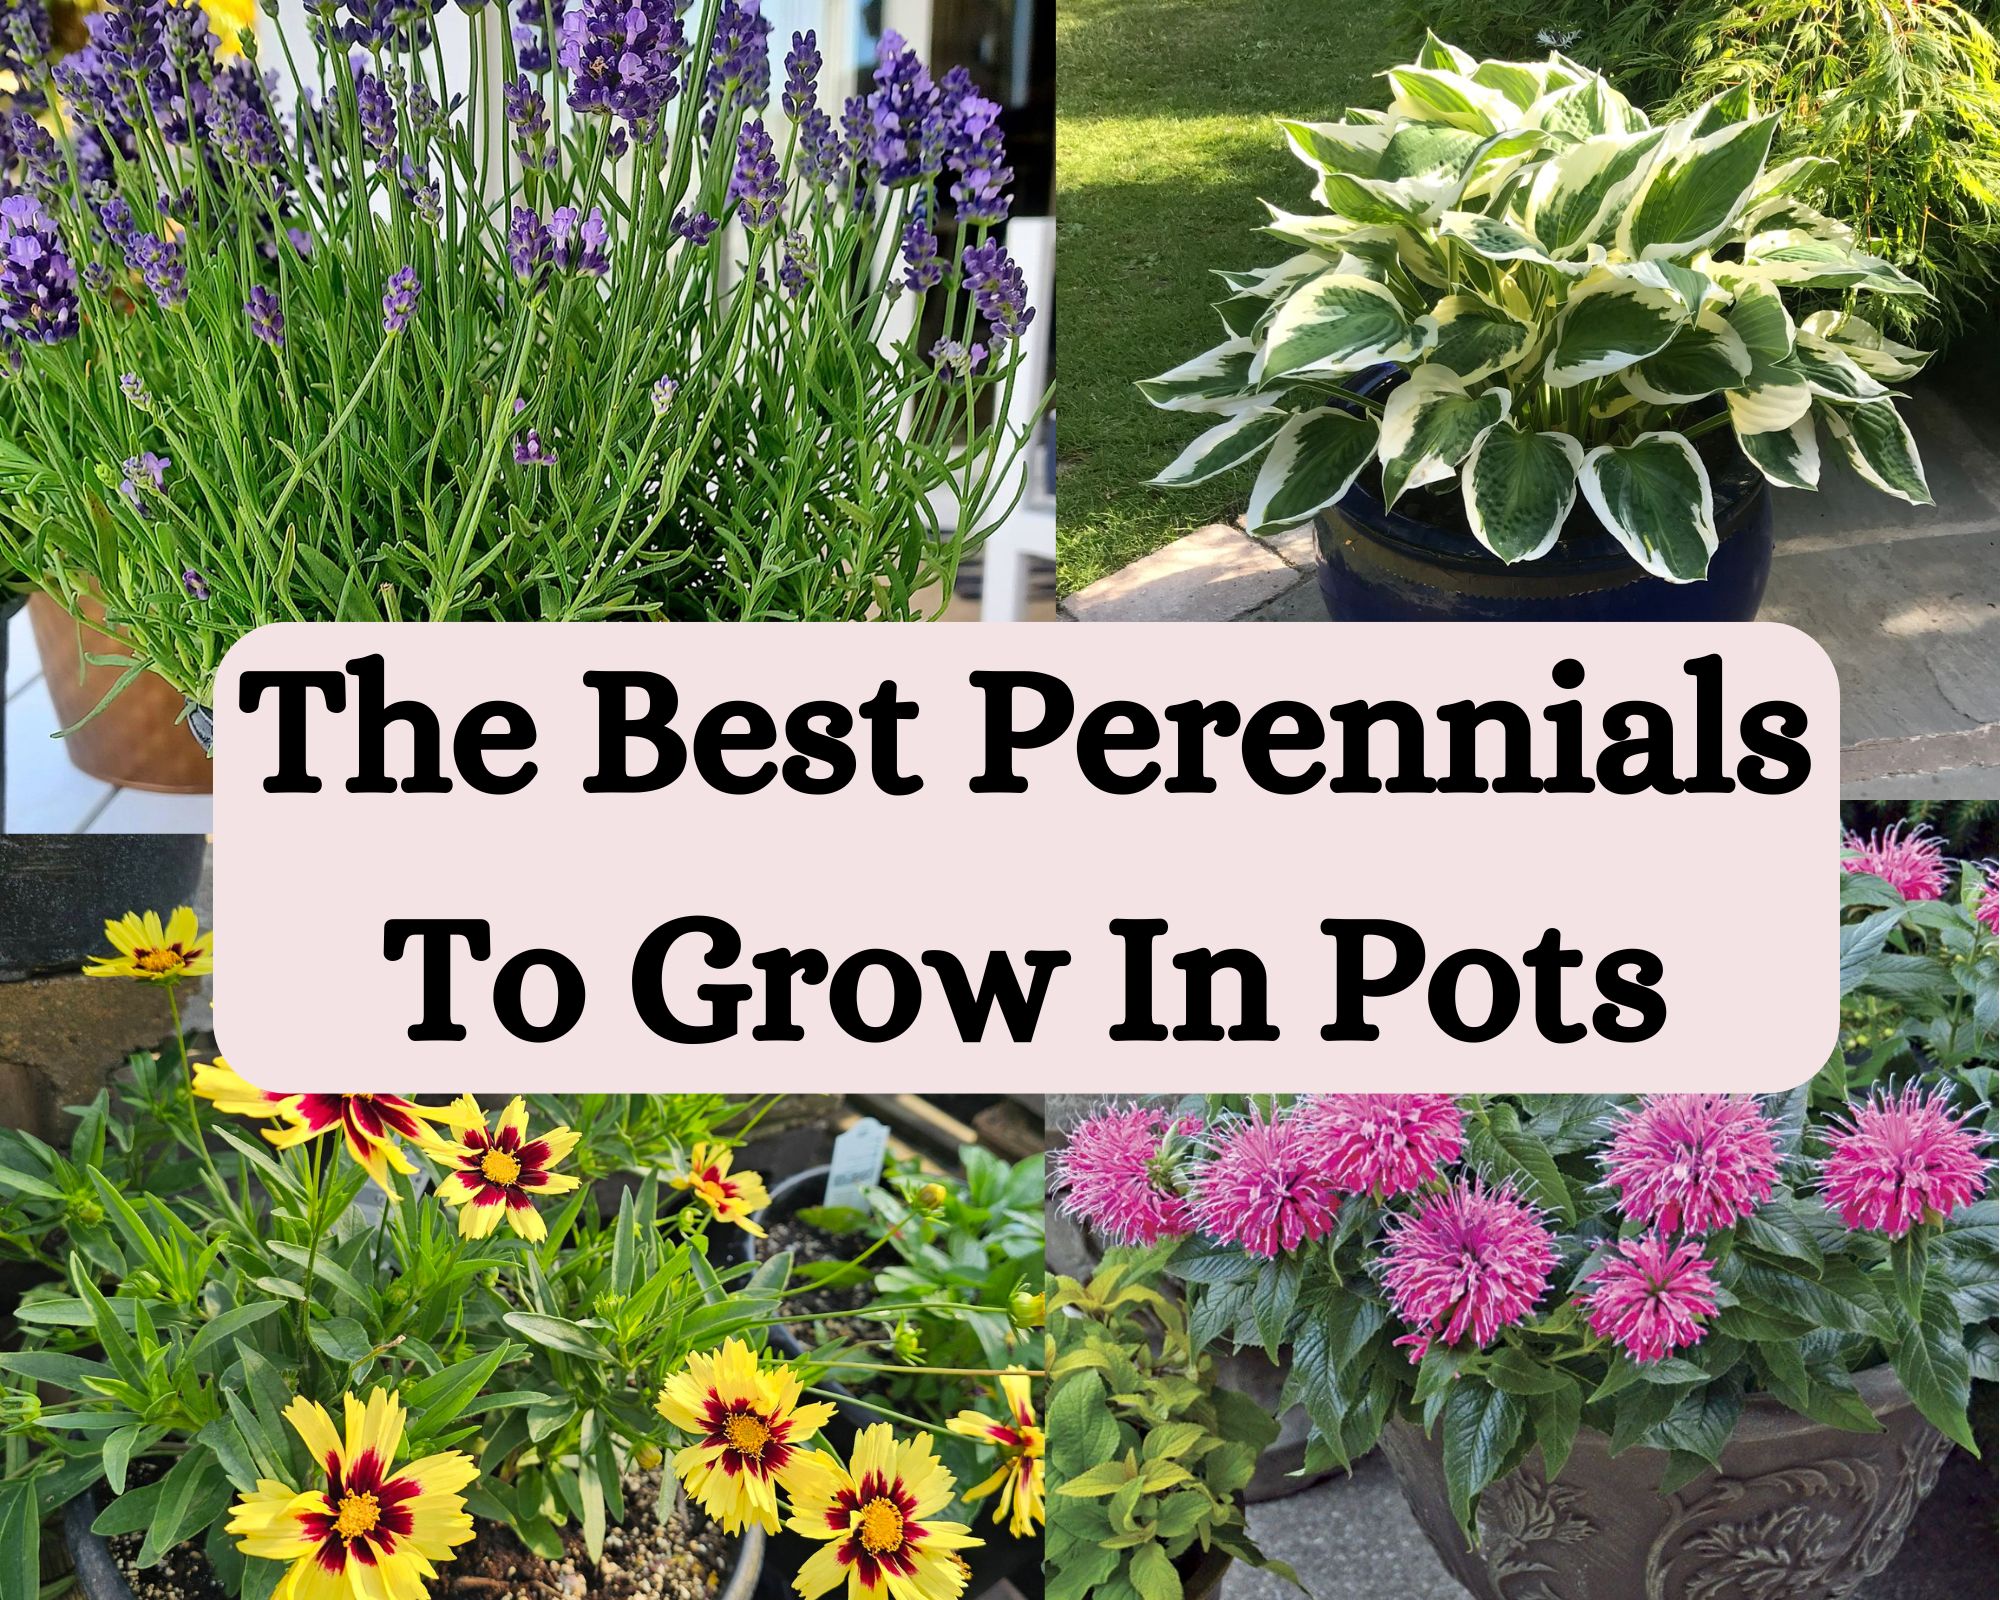 The Best Perennials To Grow In Pots